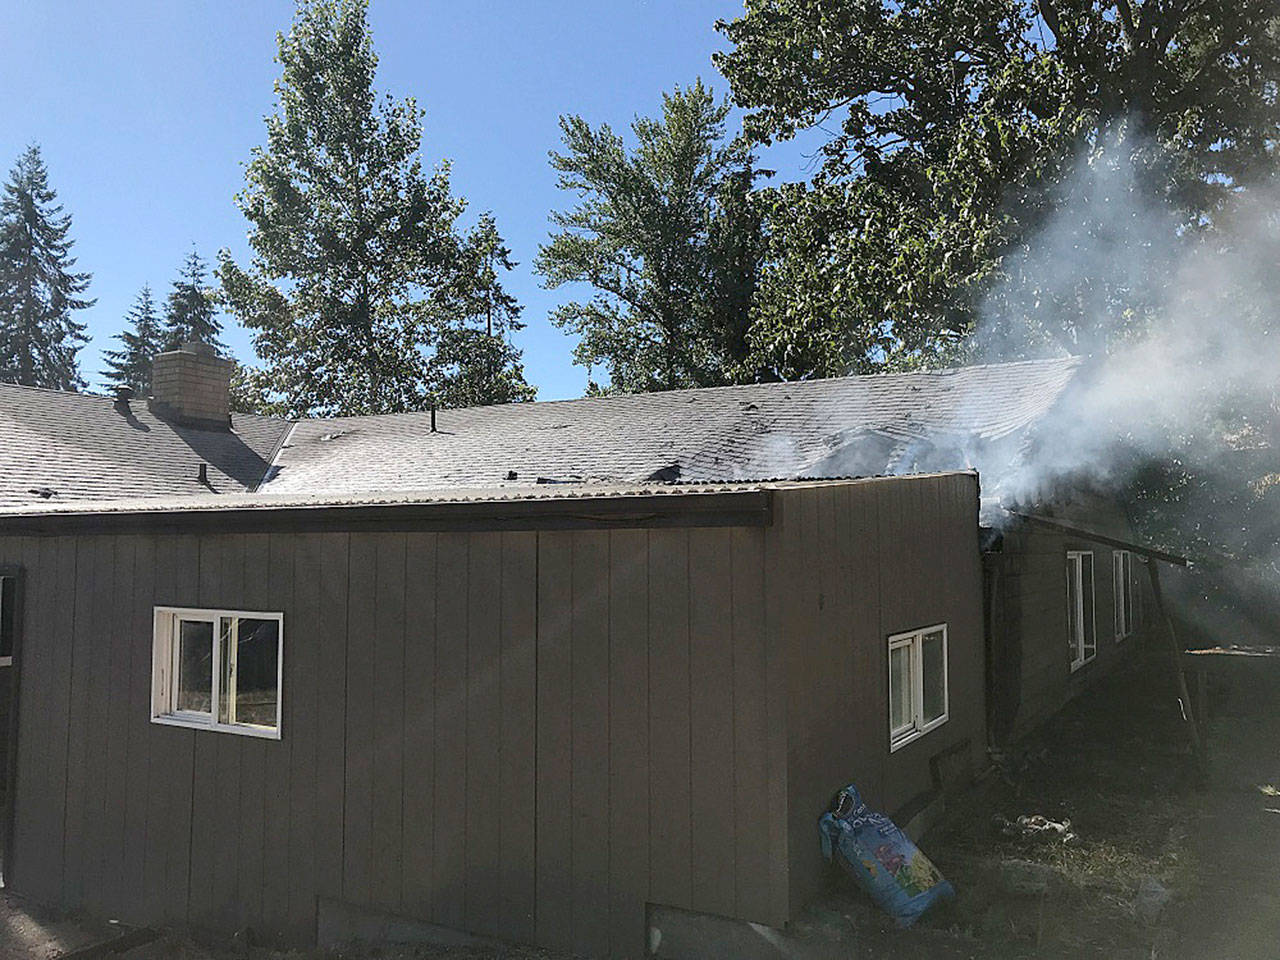 Fire damages a home Thursday in the 25300 block of 30th Avenue South on the West Hill. COURTESY PHOTO, Puget Sound RFA